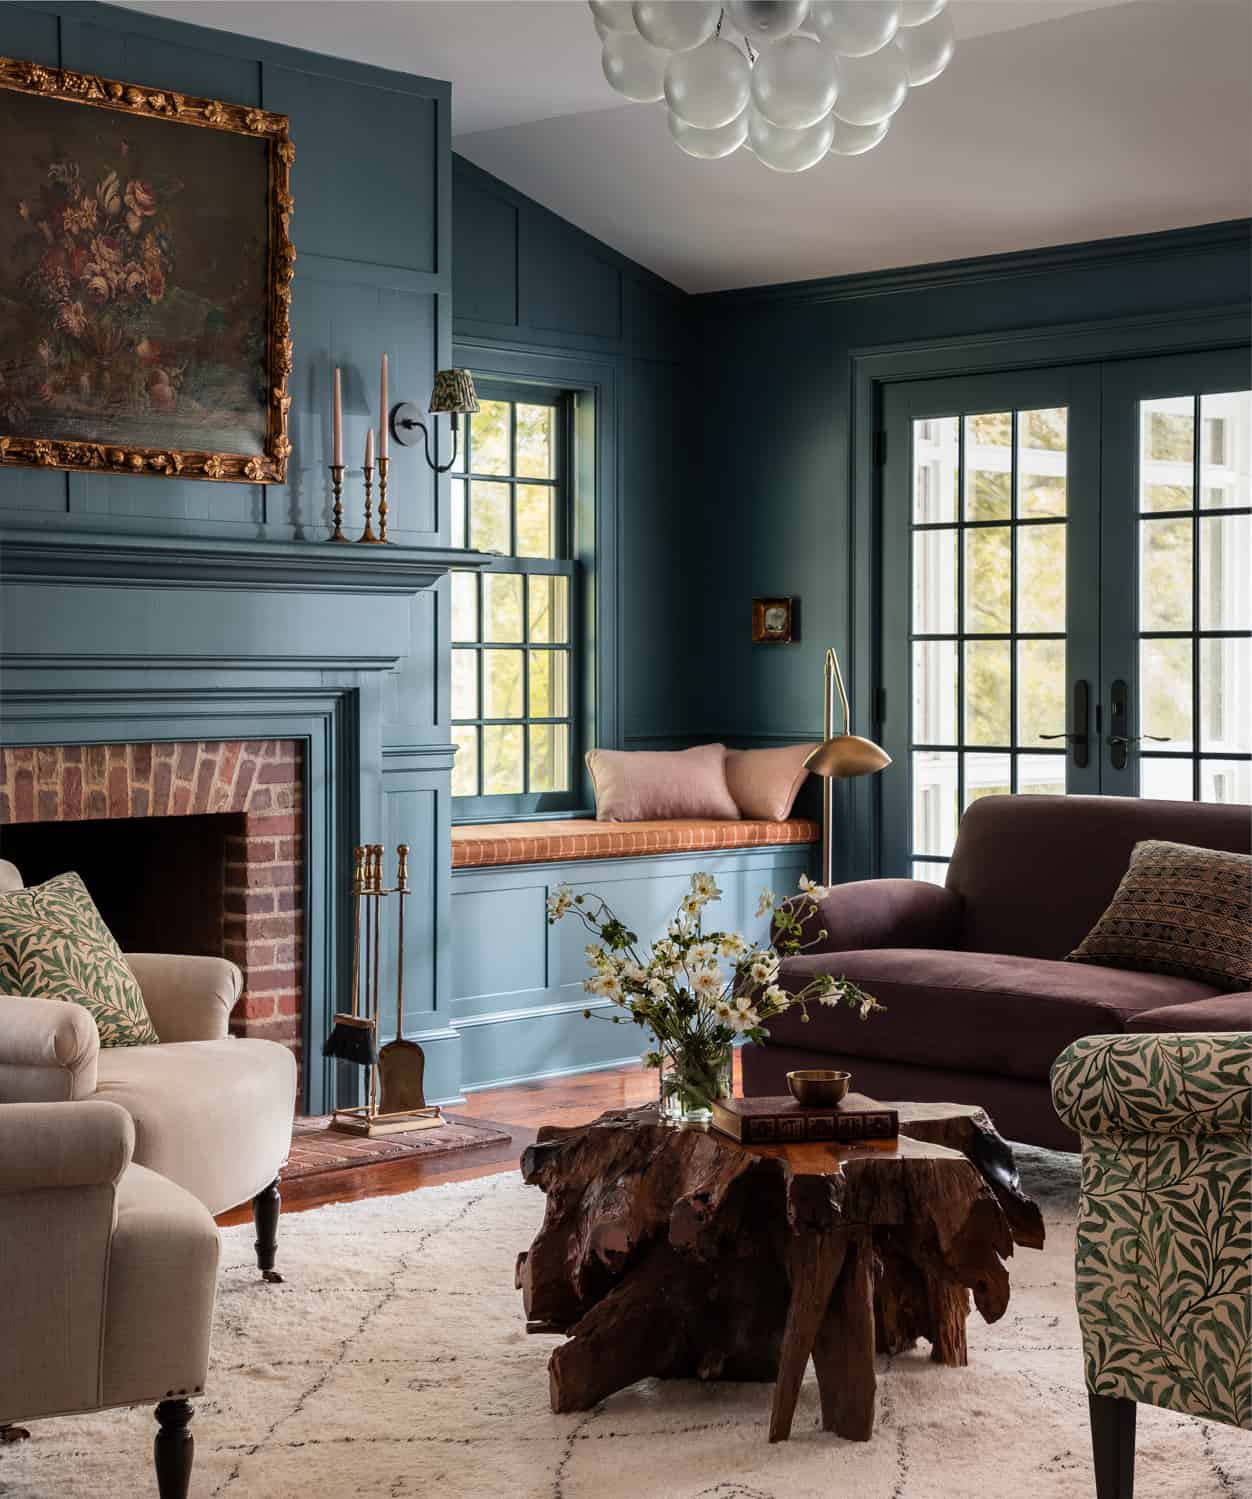 Patterns and Historic Charm in a Bedford Home